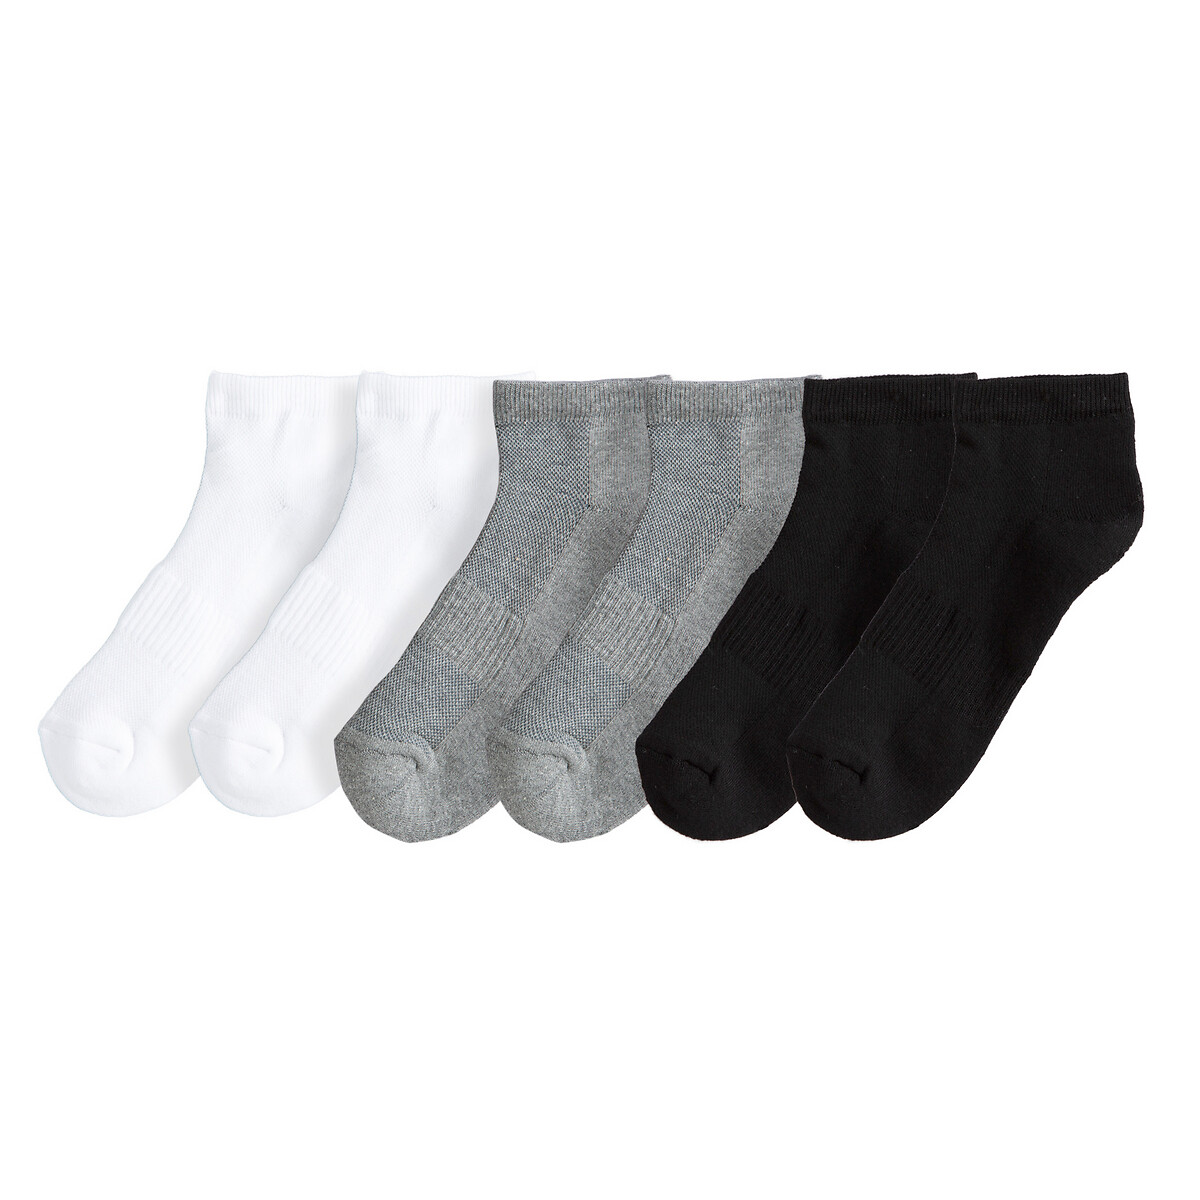 8469970-000-1023047-00019-1 3 To 5.5 La Redoute Collections Big Girls Pack Of 5 Pairs Of Socks Sizes 00/2-6/9.5 Other Size 19/22